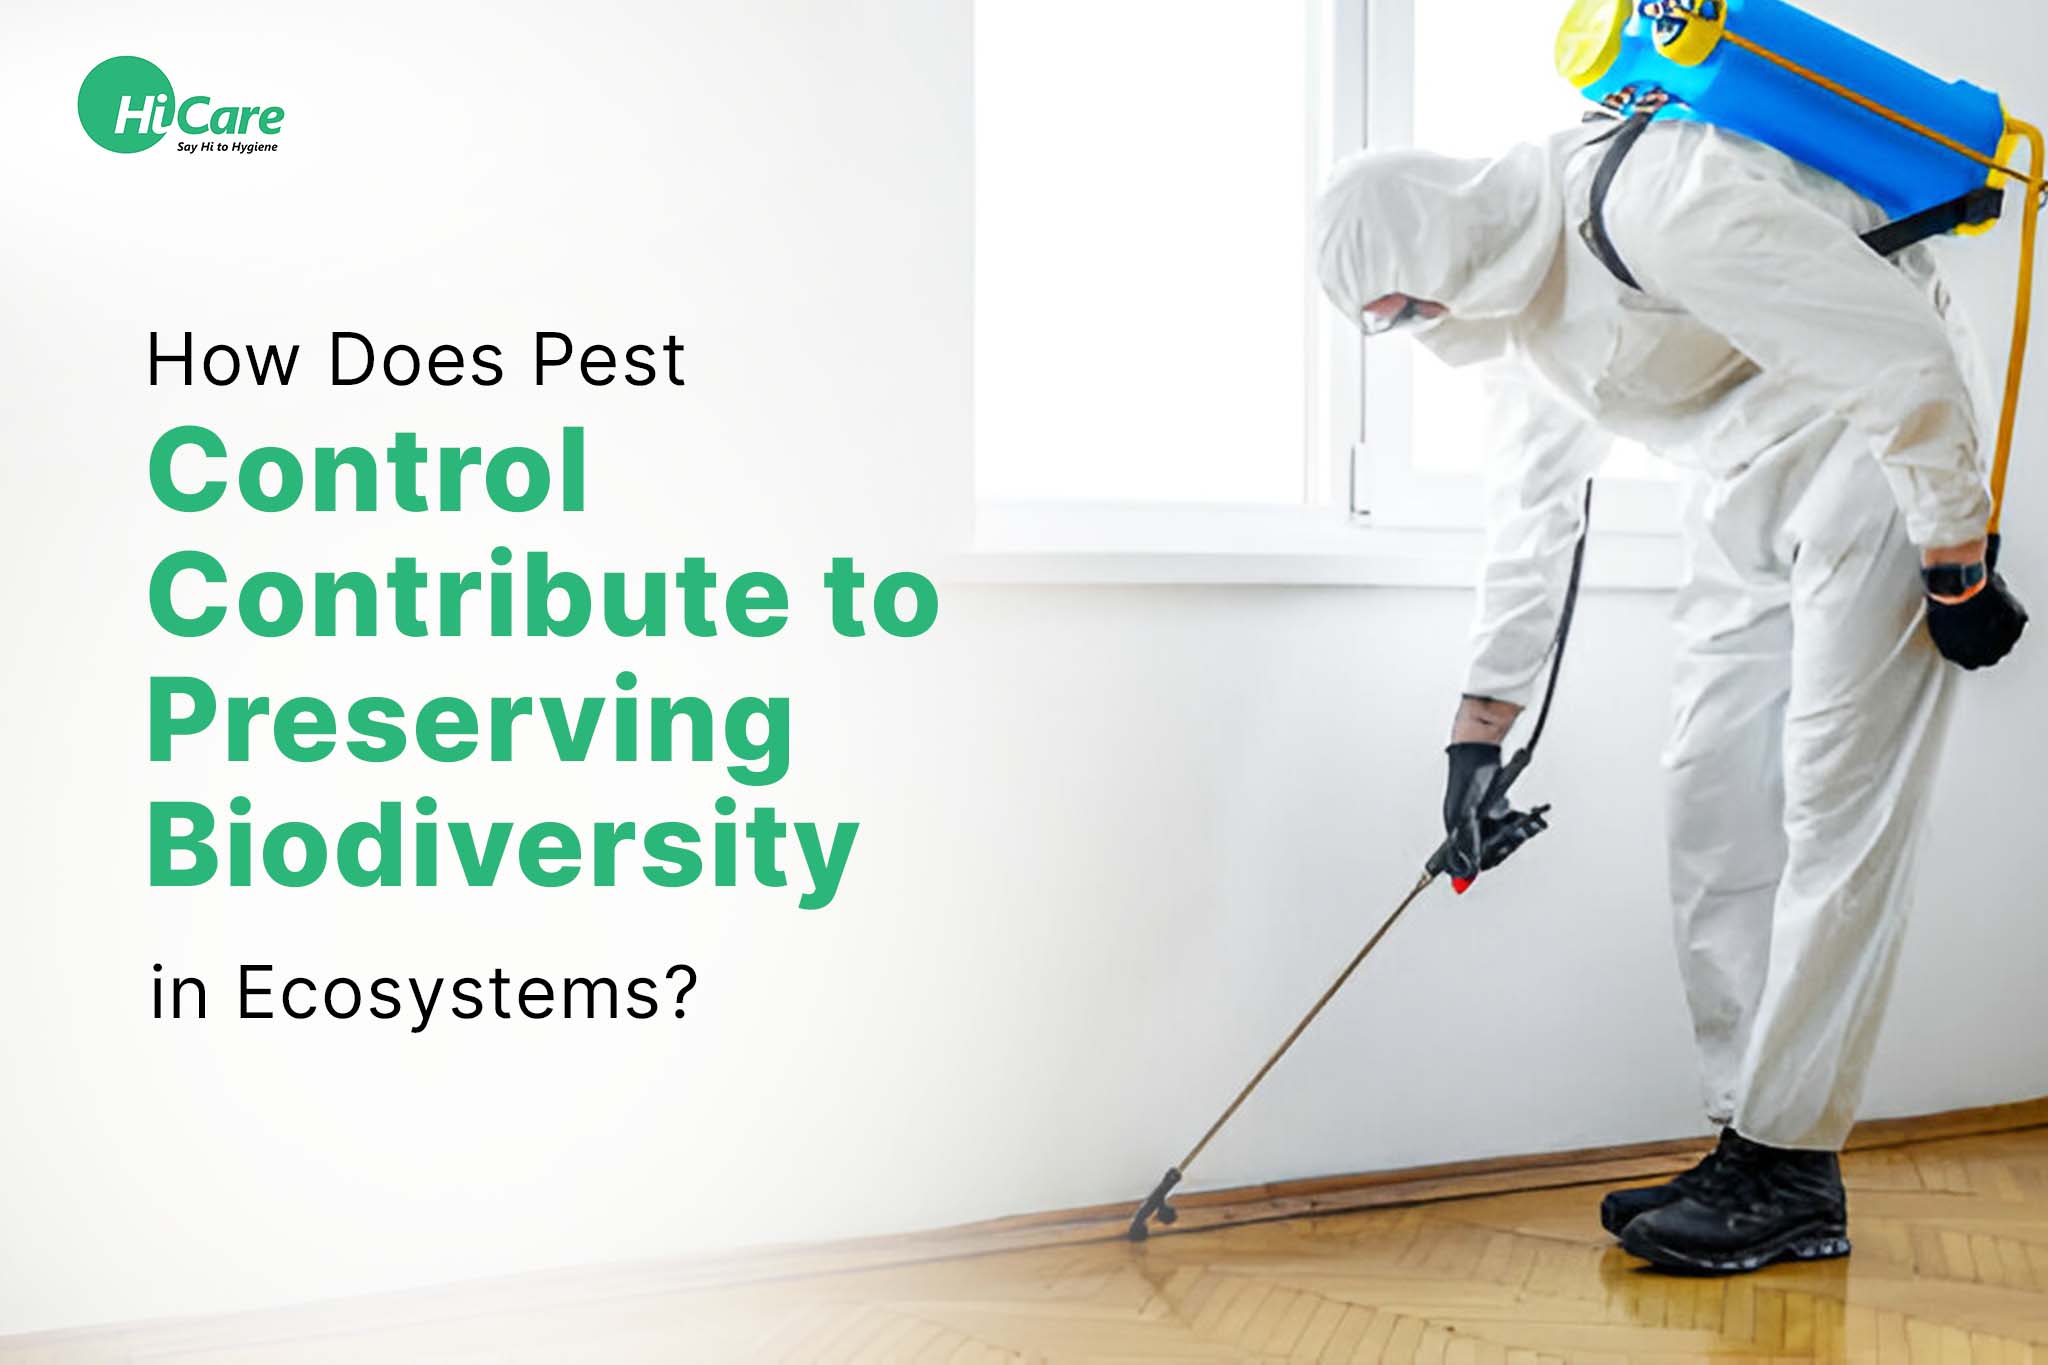 How Does Pest Control Contribute to Preserving Biodiversity in Ecosystems?